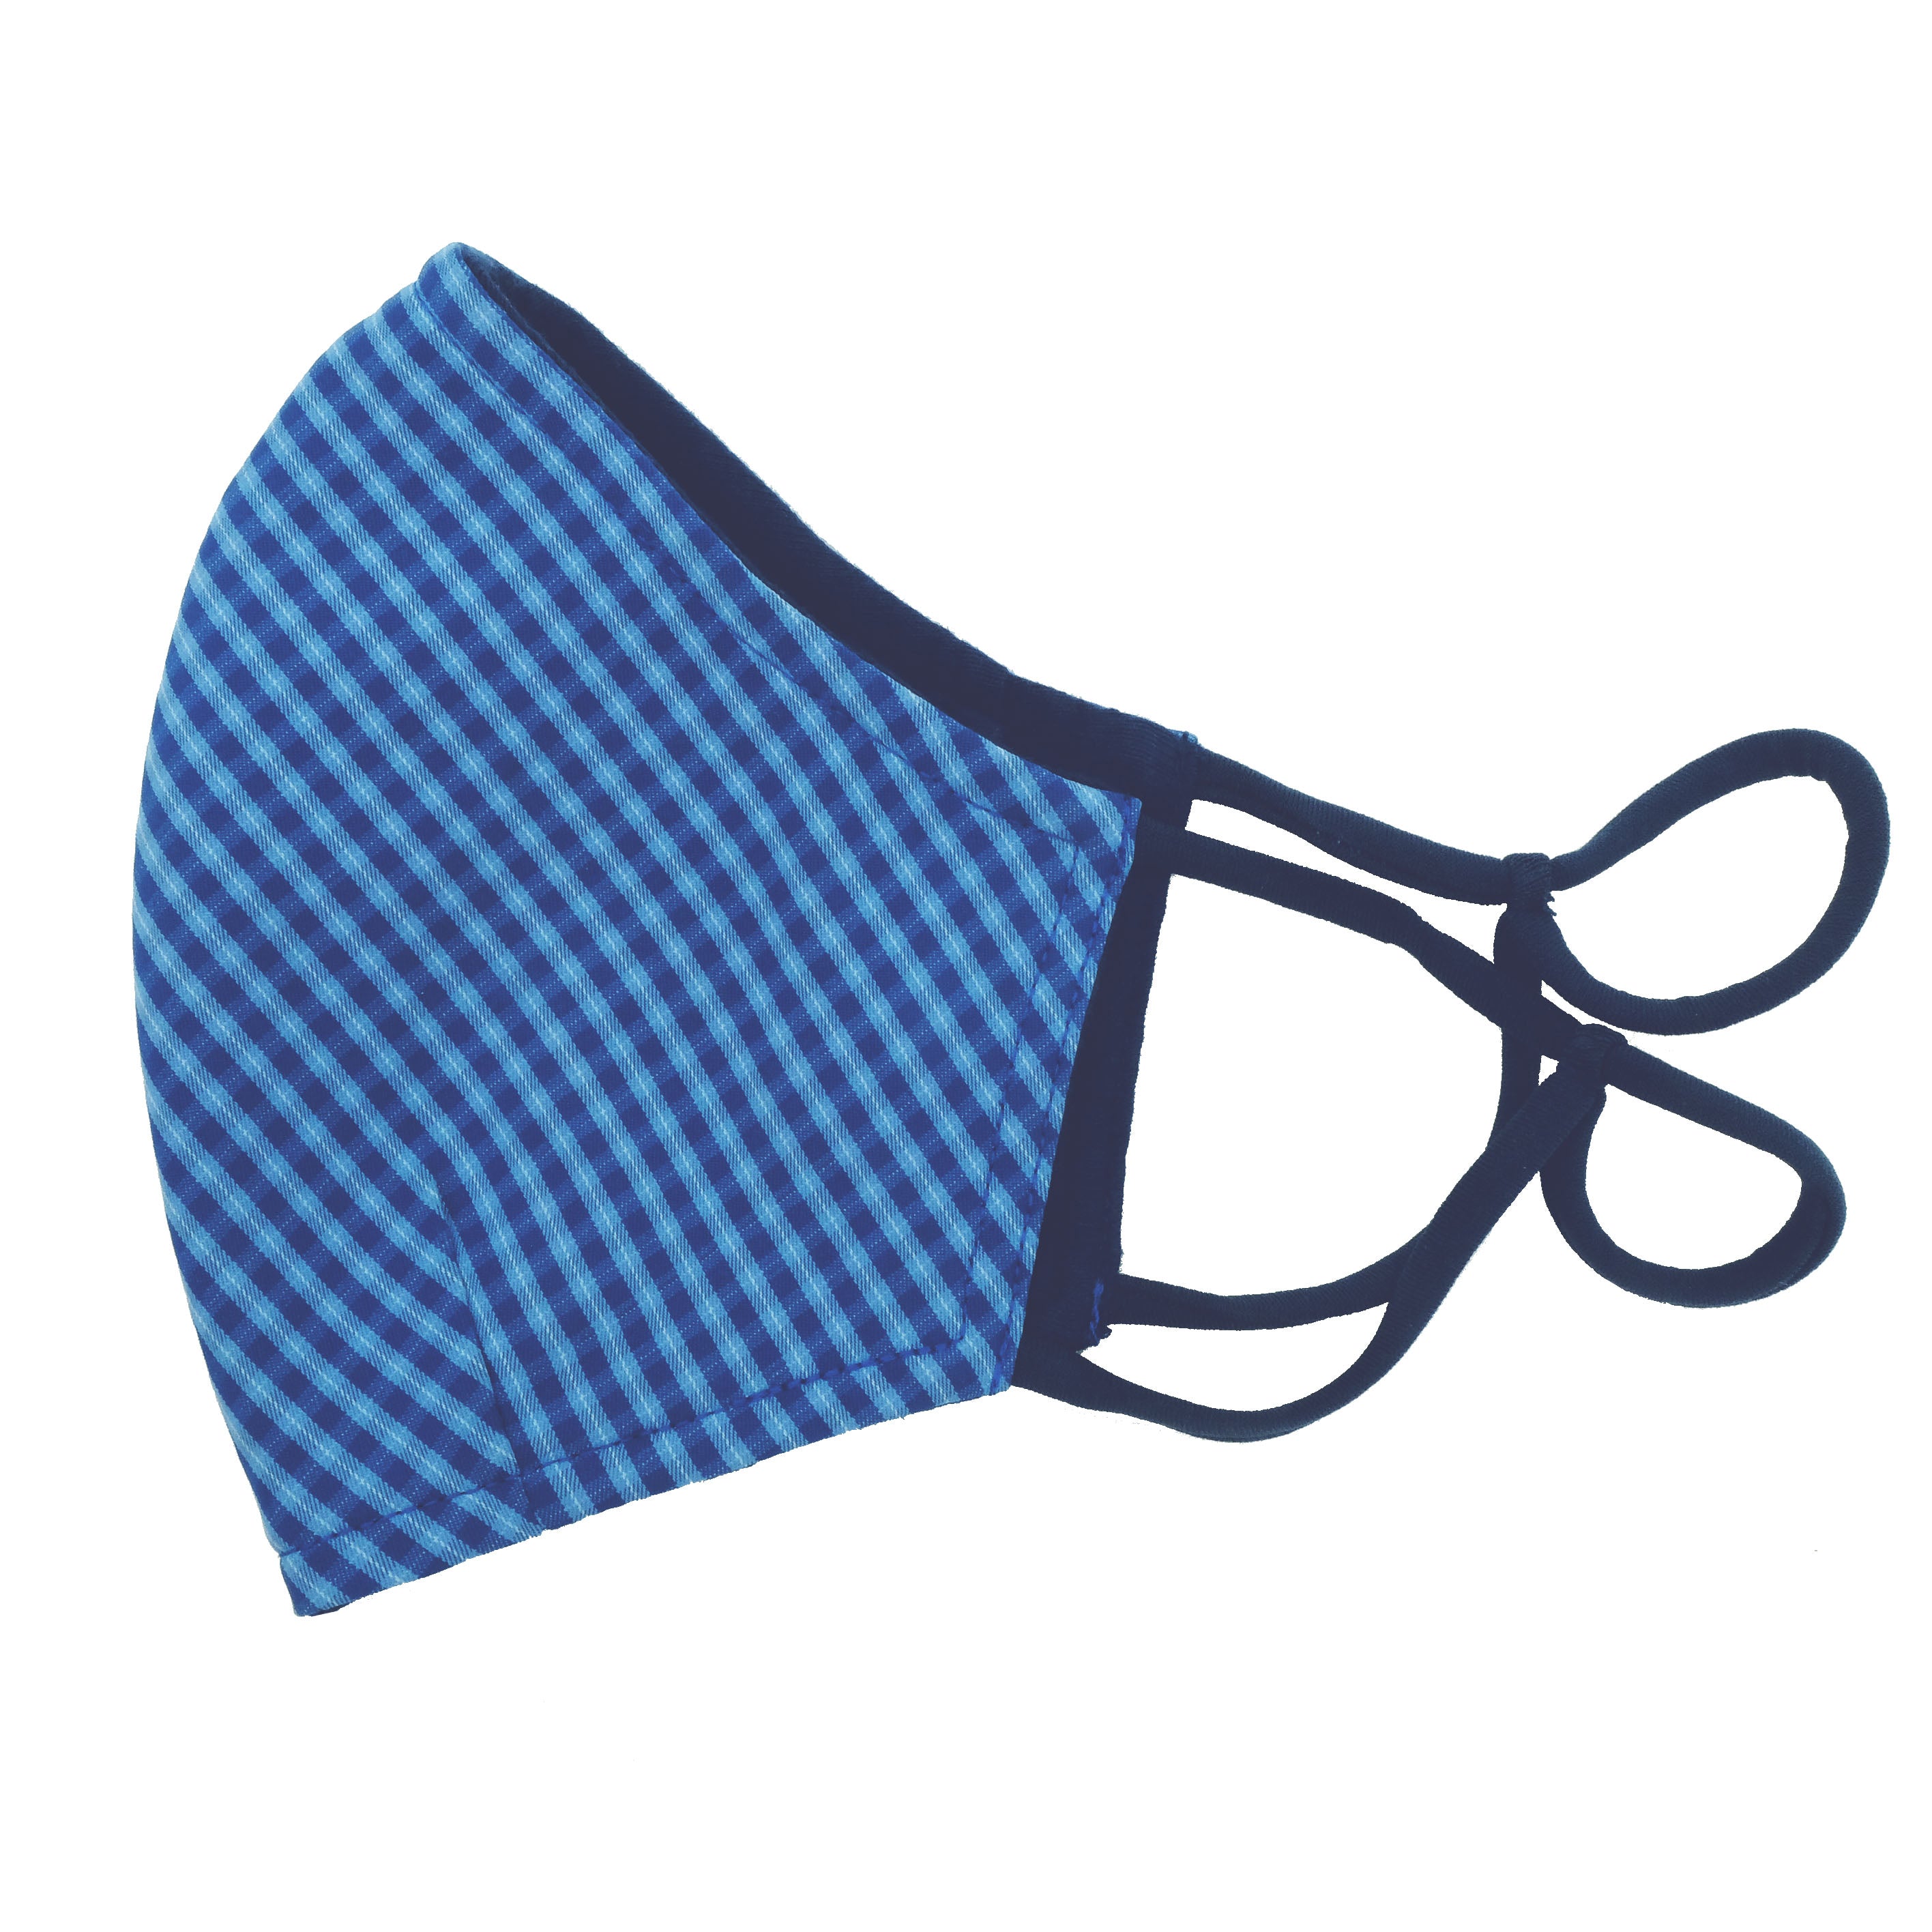 The Premium Reusable Face Mask in Black Watch Blue